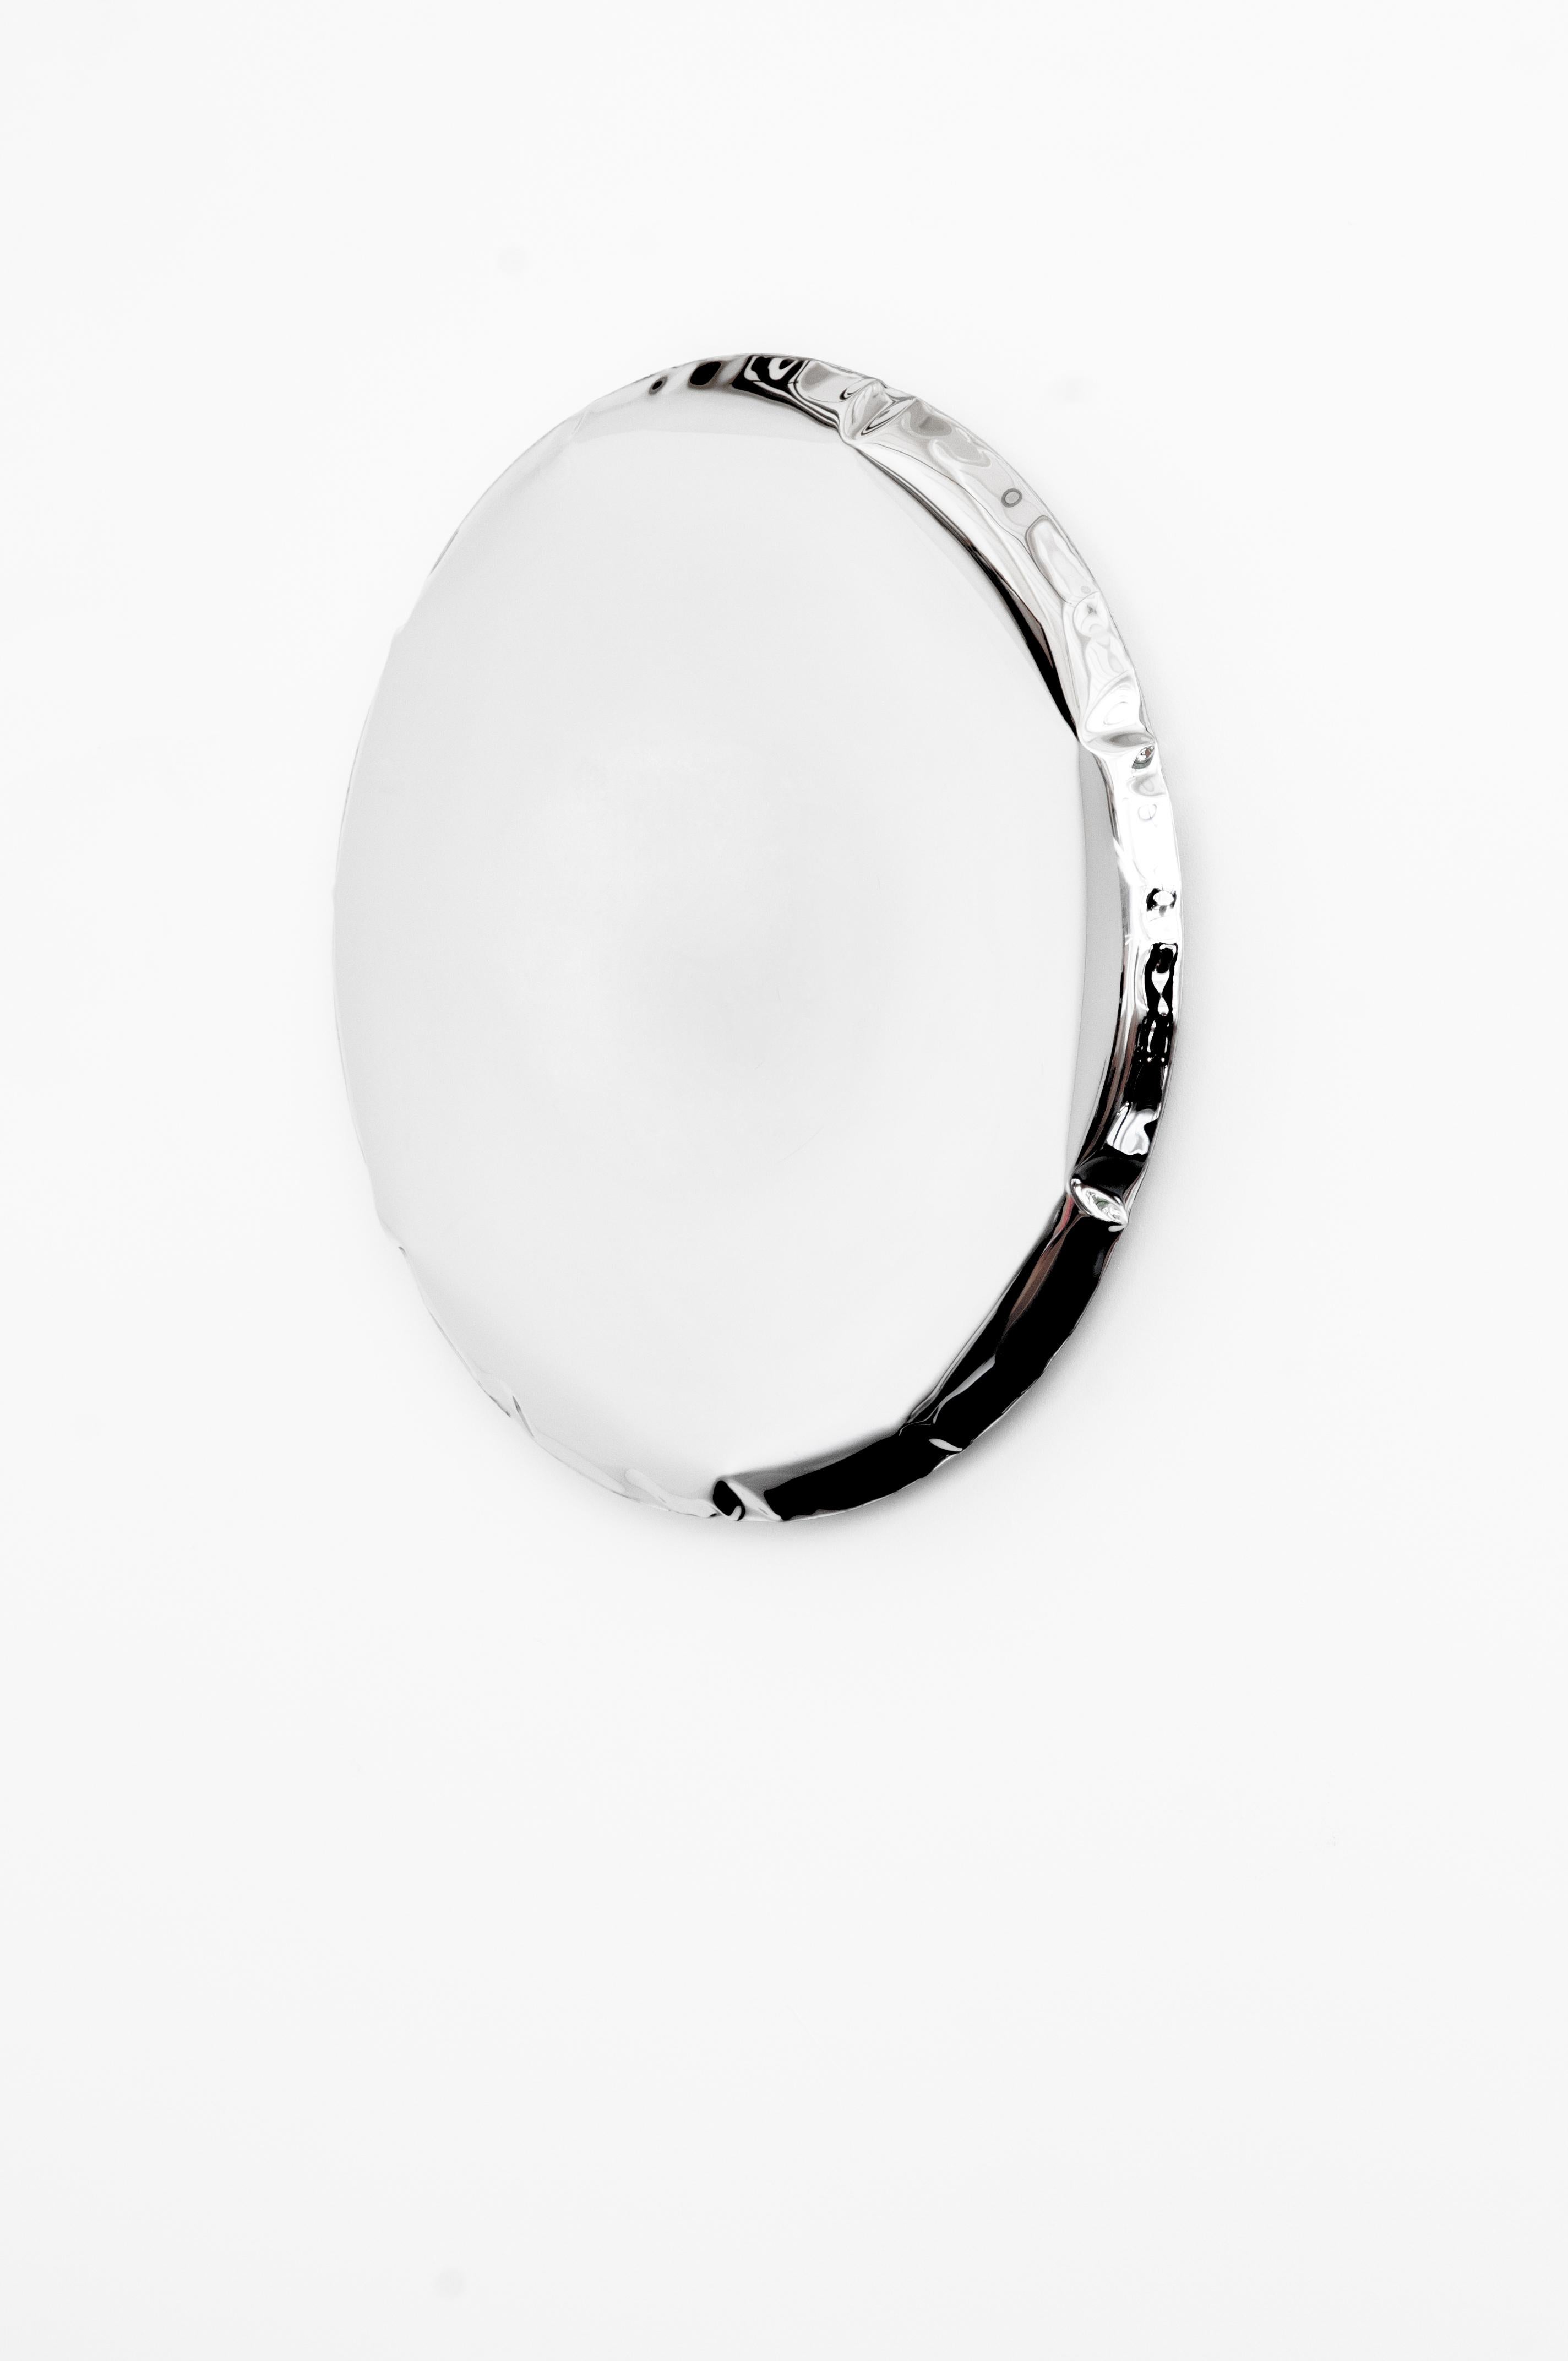 Organic Modern Mirror 'OKO 120' in Polished Stainless Steel by Zieta (in stock) For Sale